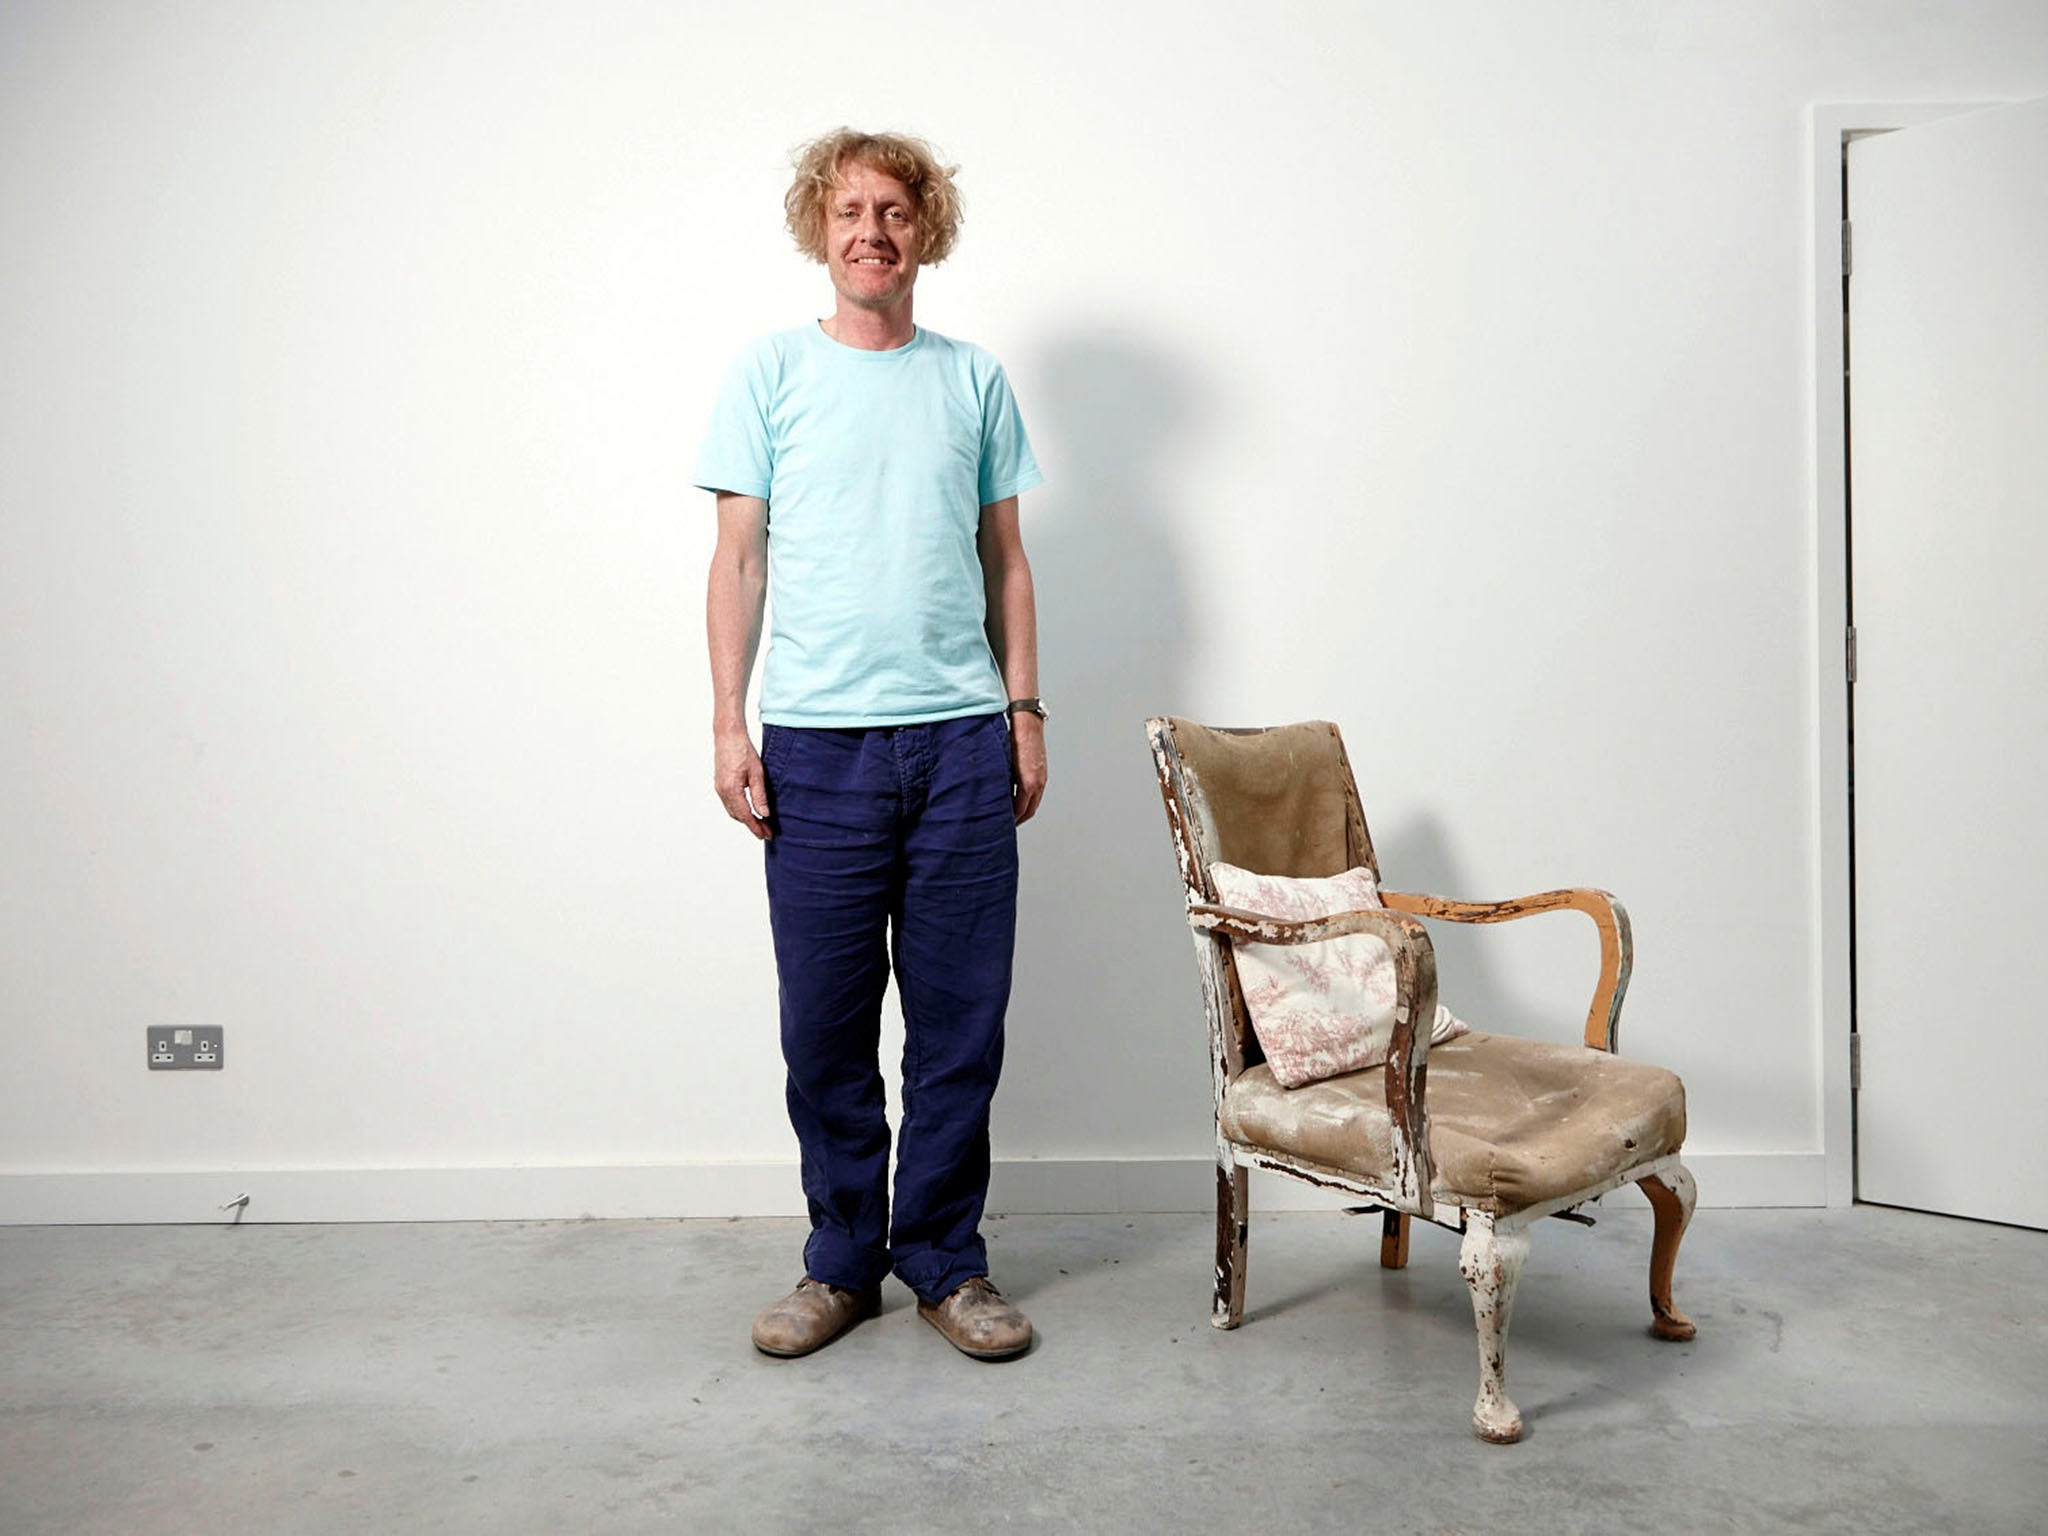 Grayson Perry at his studio in North London / Summer 2014 (Richard Ansett/Channel 4 images)